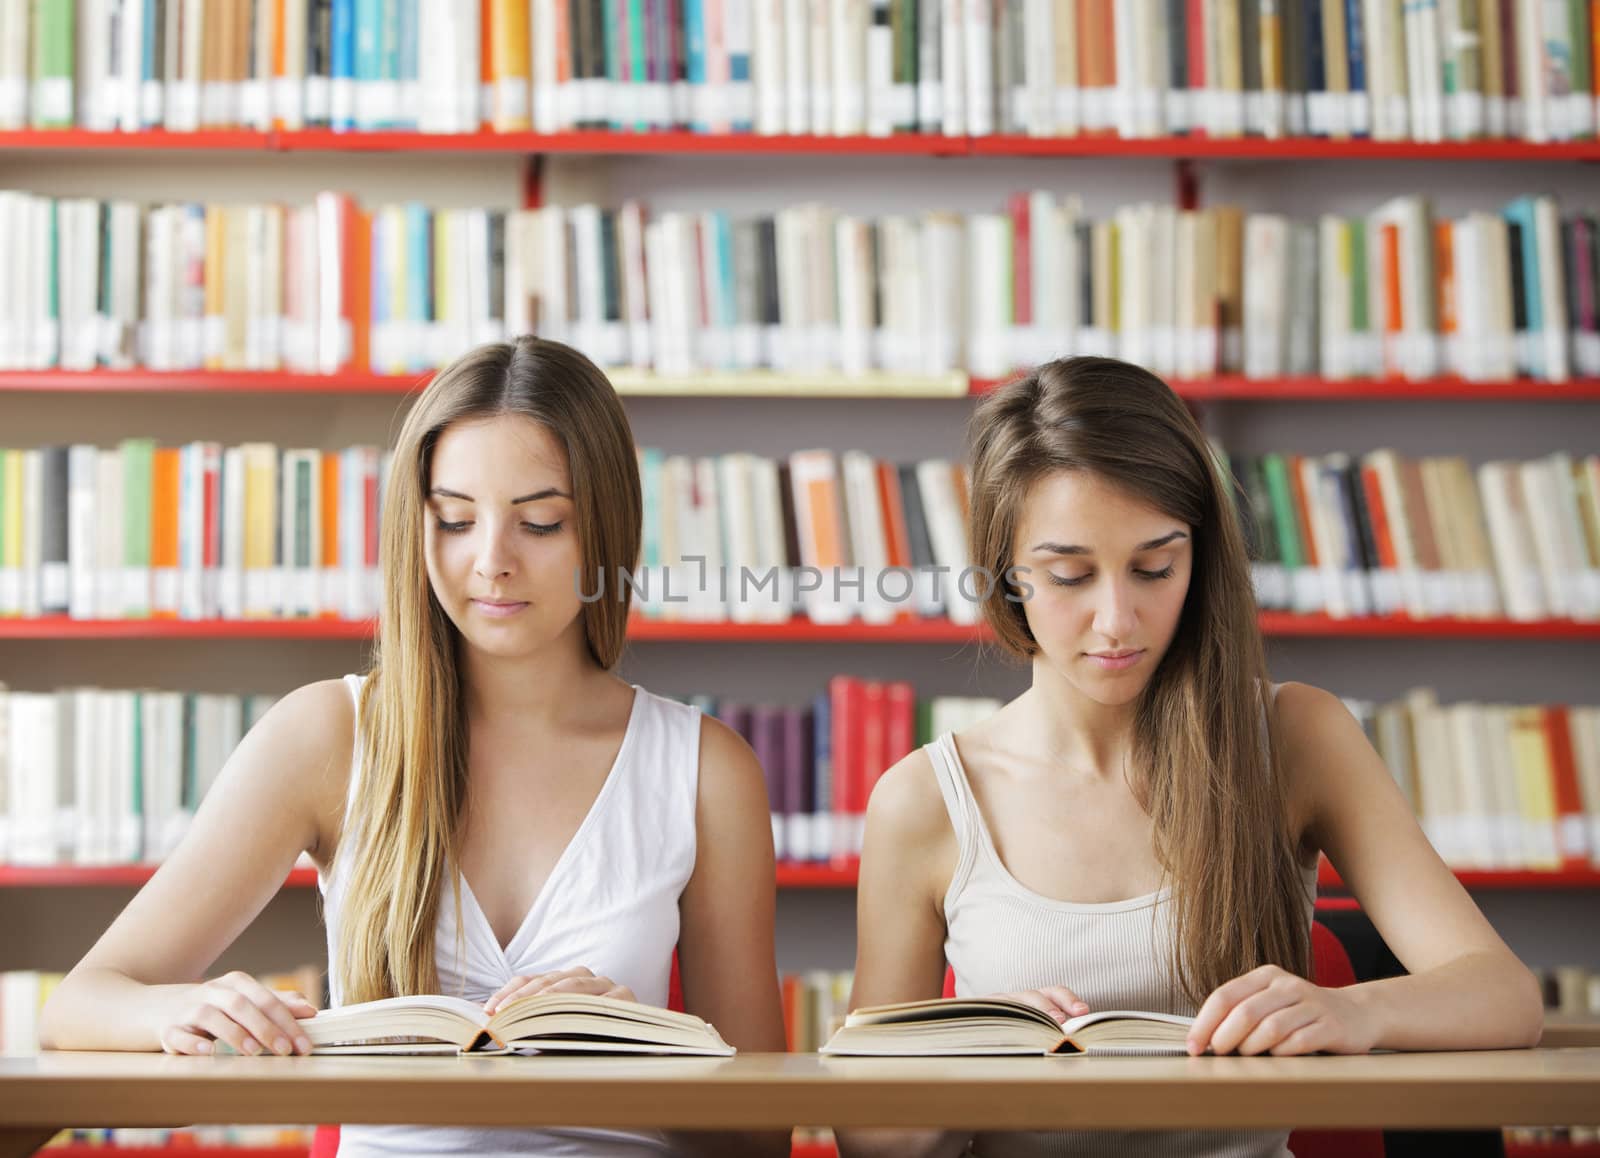 Students reading in their college library.